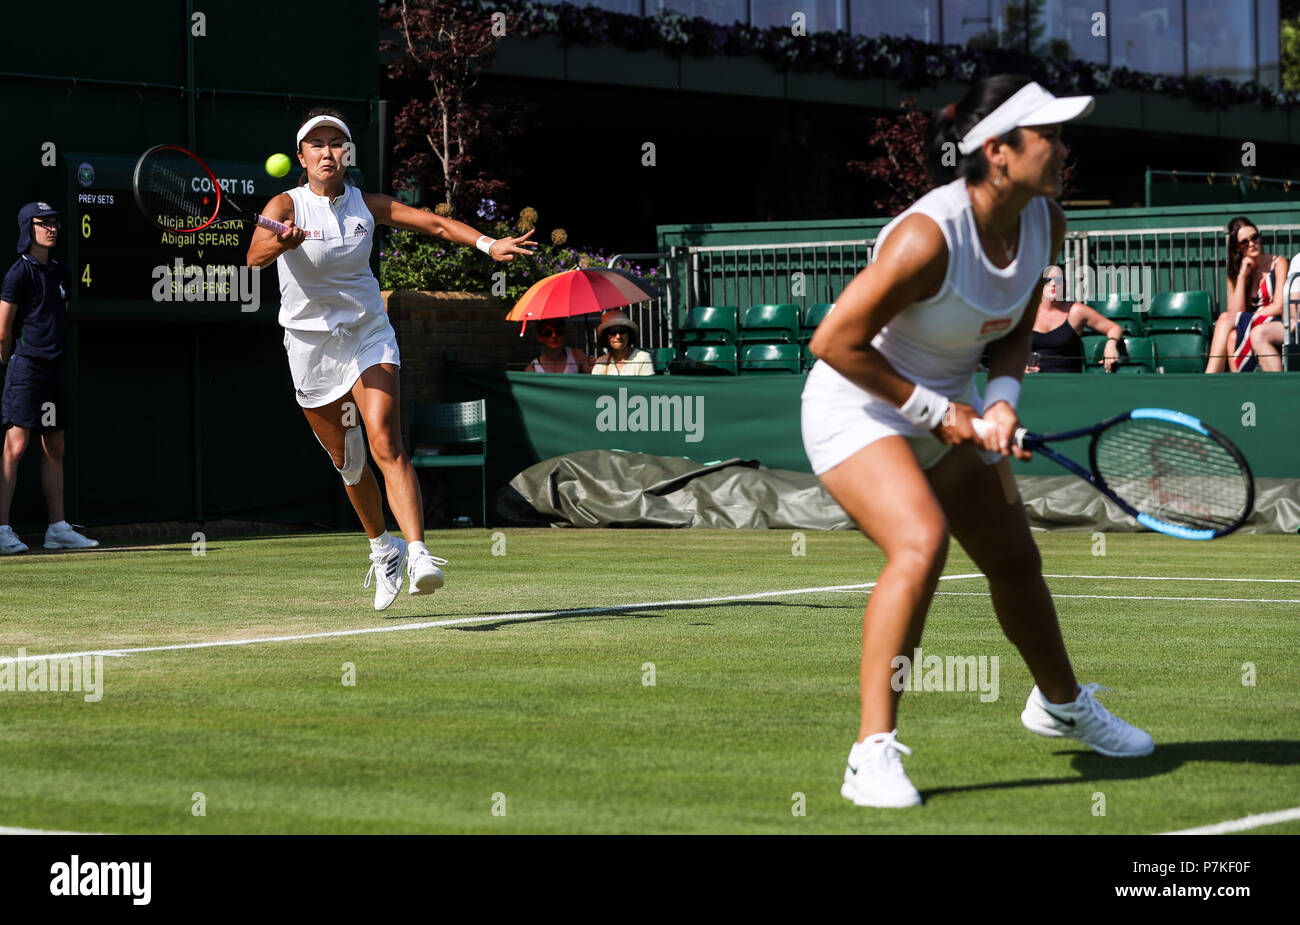 London, UK. 6th July, 2018. Peng Shuai (L) of China and Latisha Chan of Chinese Taipei compete during the women's doubles second round match against Abigail Spears of the United States and Alicja Rosolska of Poland at the Wimbledon Championships 2018 in London, Britain on July 6, 2018. Abigail Spears and Alicja Rosolska won 2-0. Credit: Tang Shi/Xinhua/Alamy Live News Stock Photo